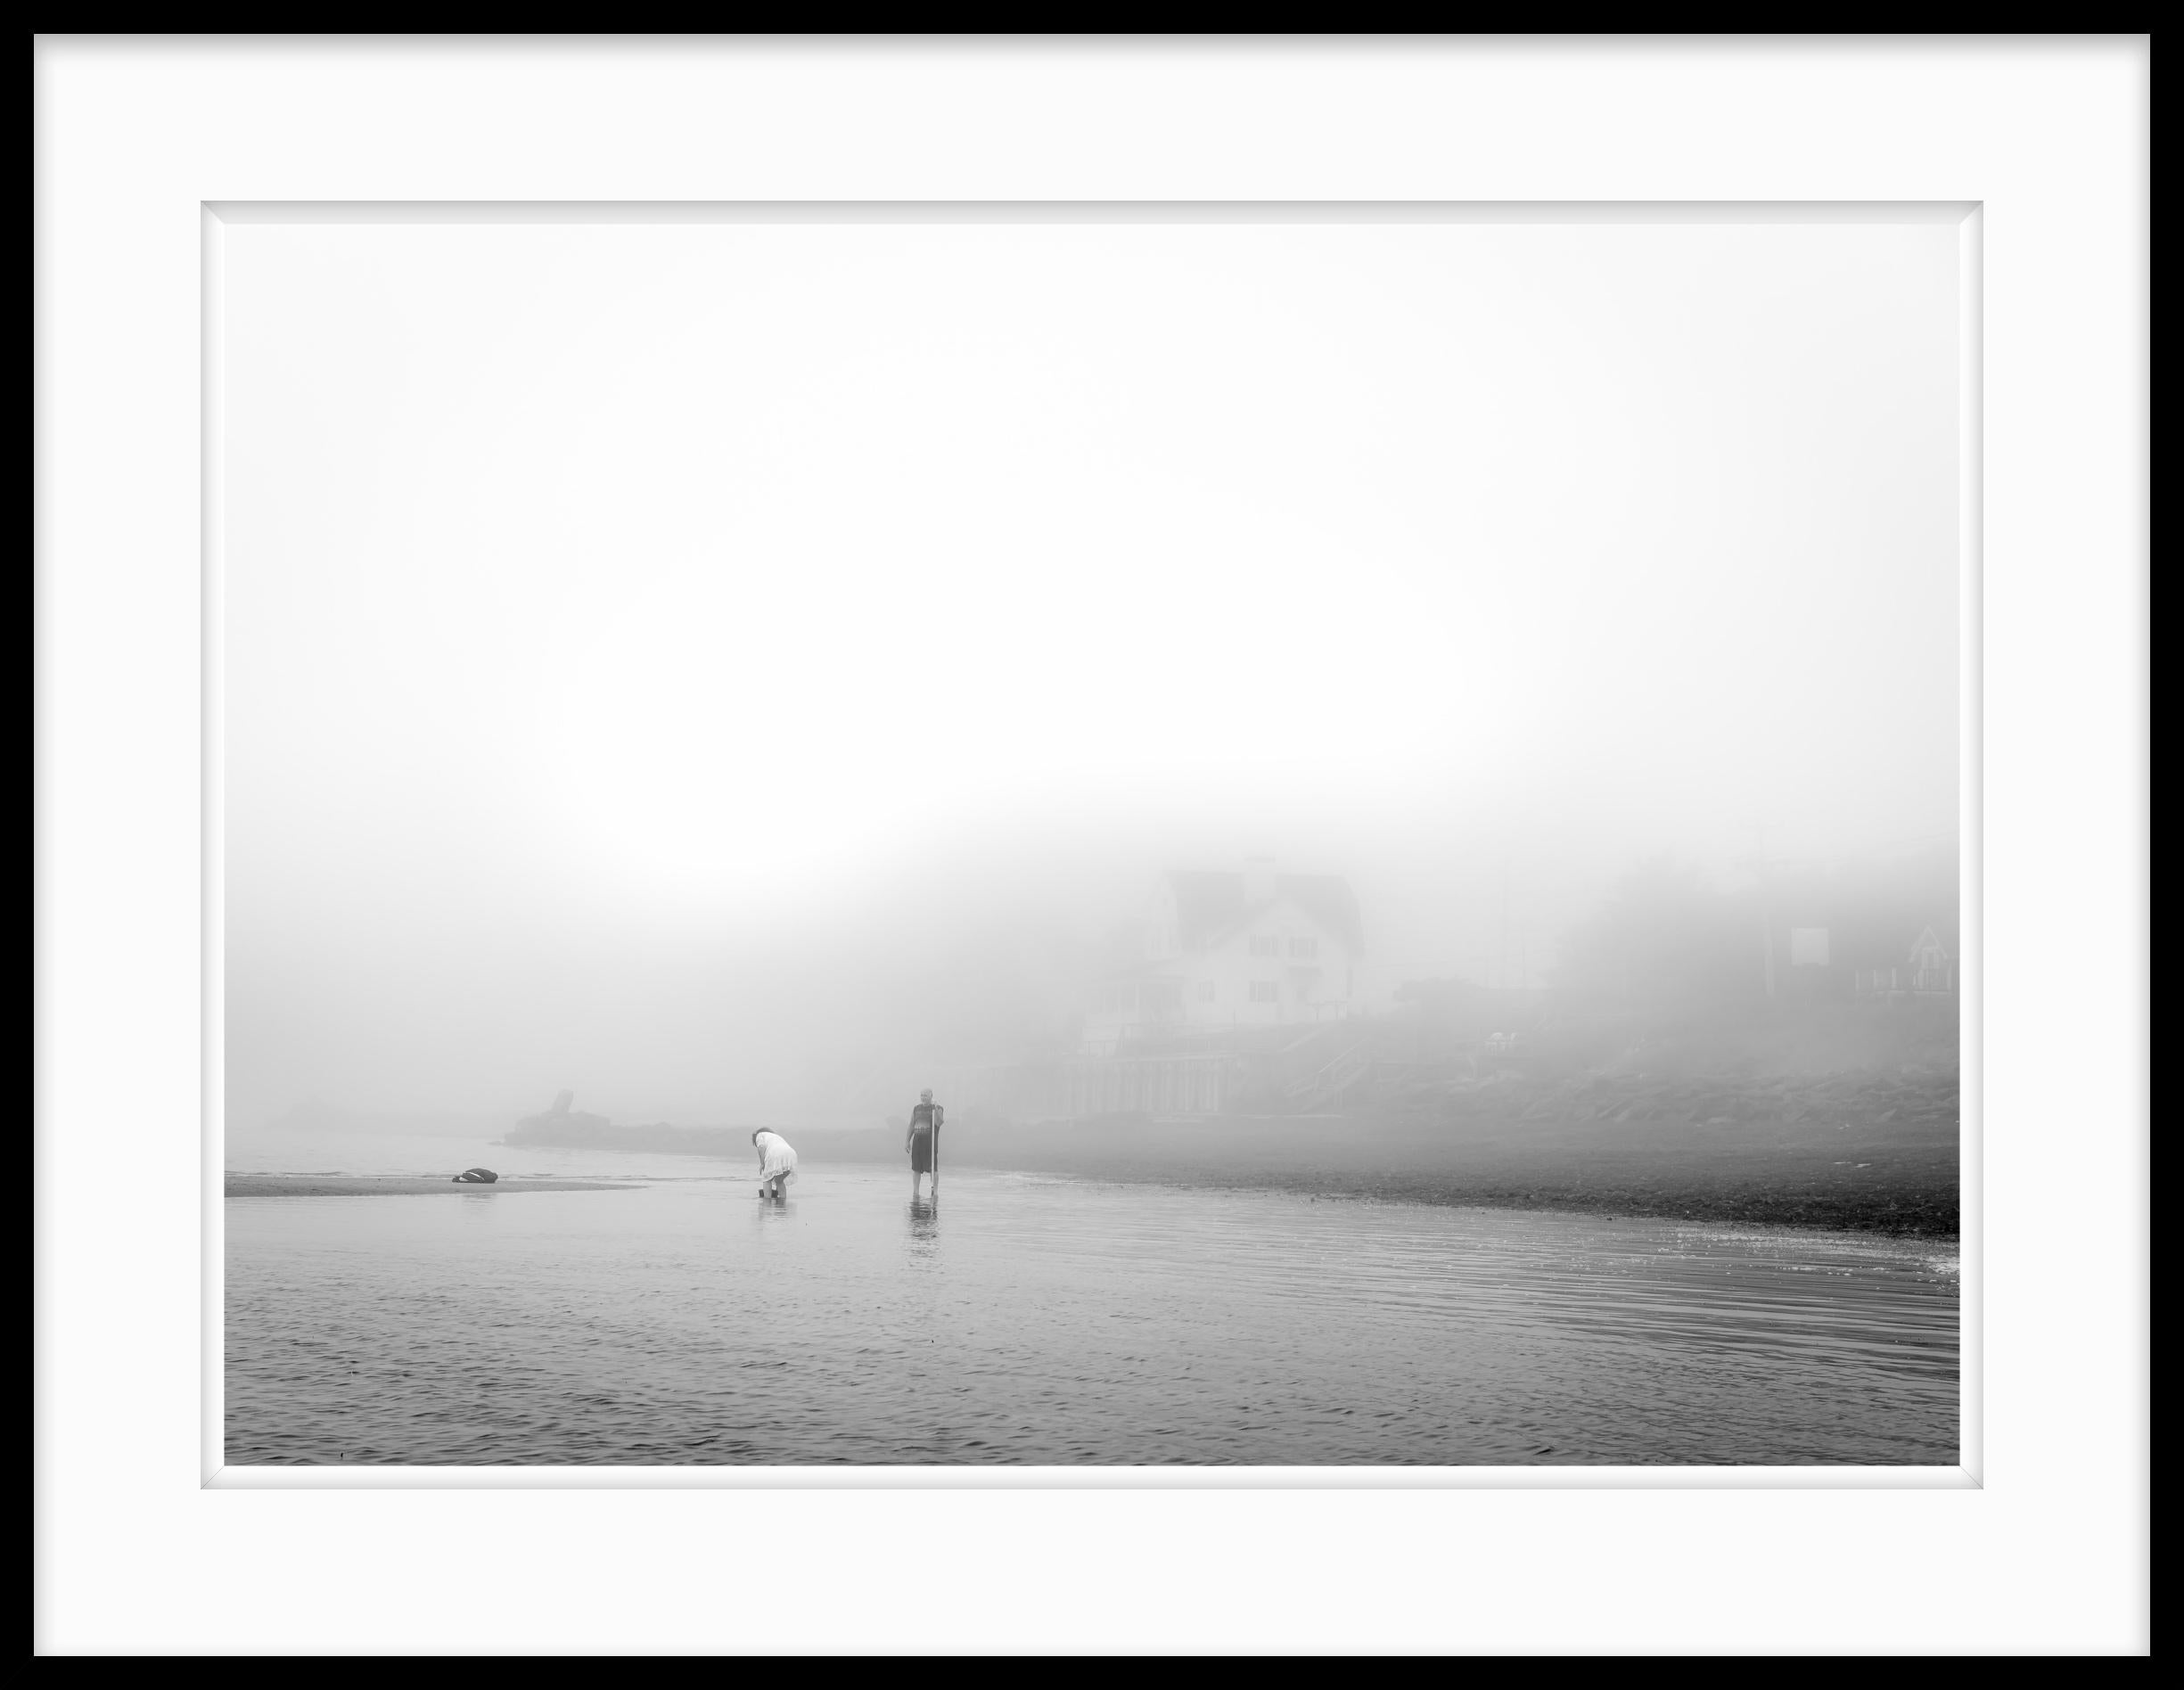 Limited edition black and white photograph on archival pigment print. Photographed on Cape Cod, MA on a particularly foggy morning on the tidal flats off Provincetown.

About:
Lewis’ artistic practice often explores science, engineering, technology,